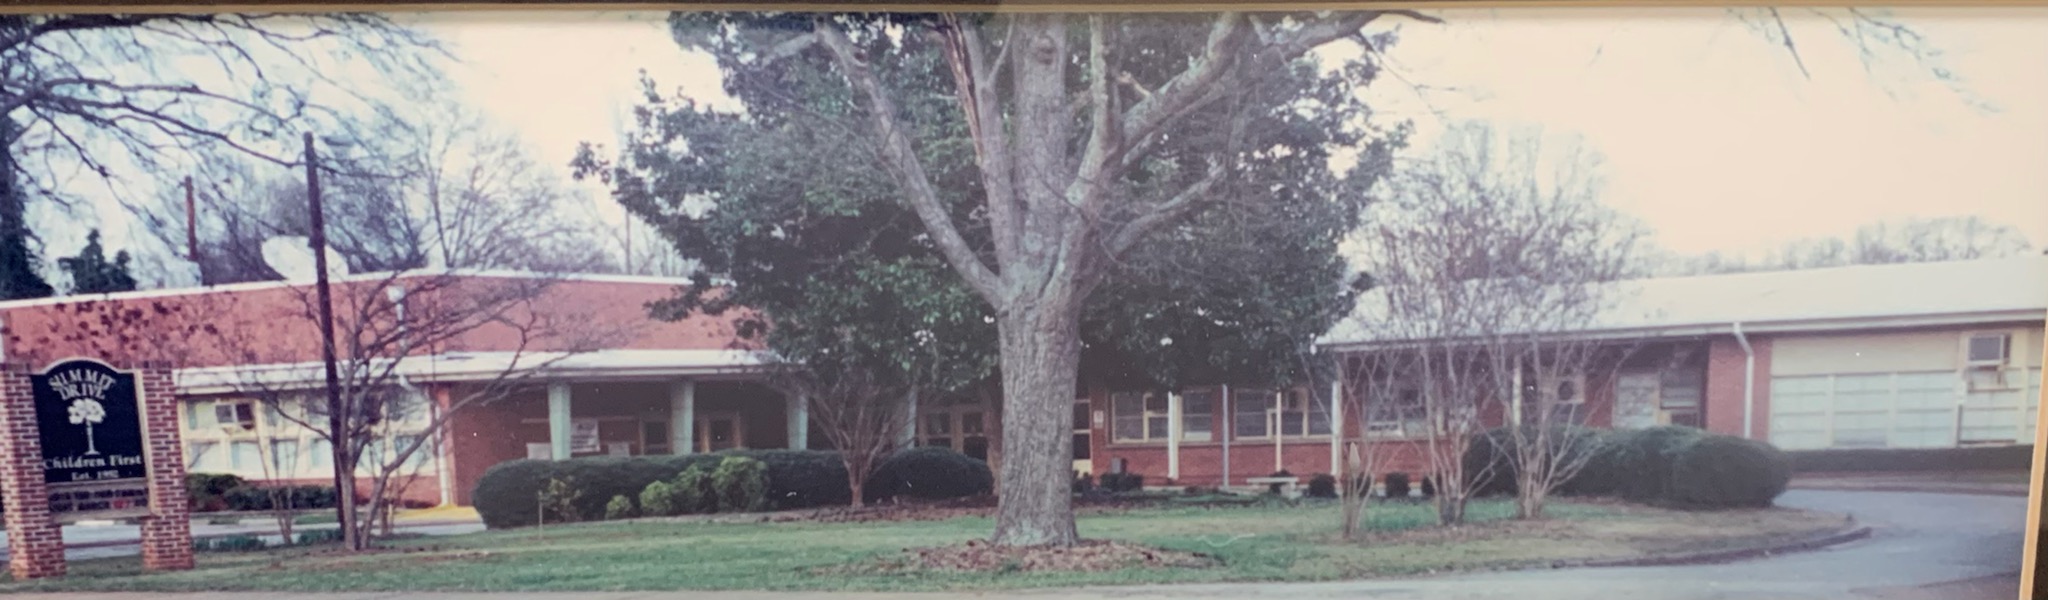 Summit Drive Elementary- Dedicated in 1952